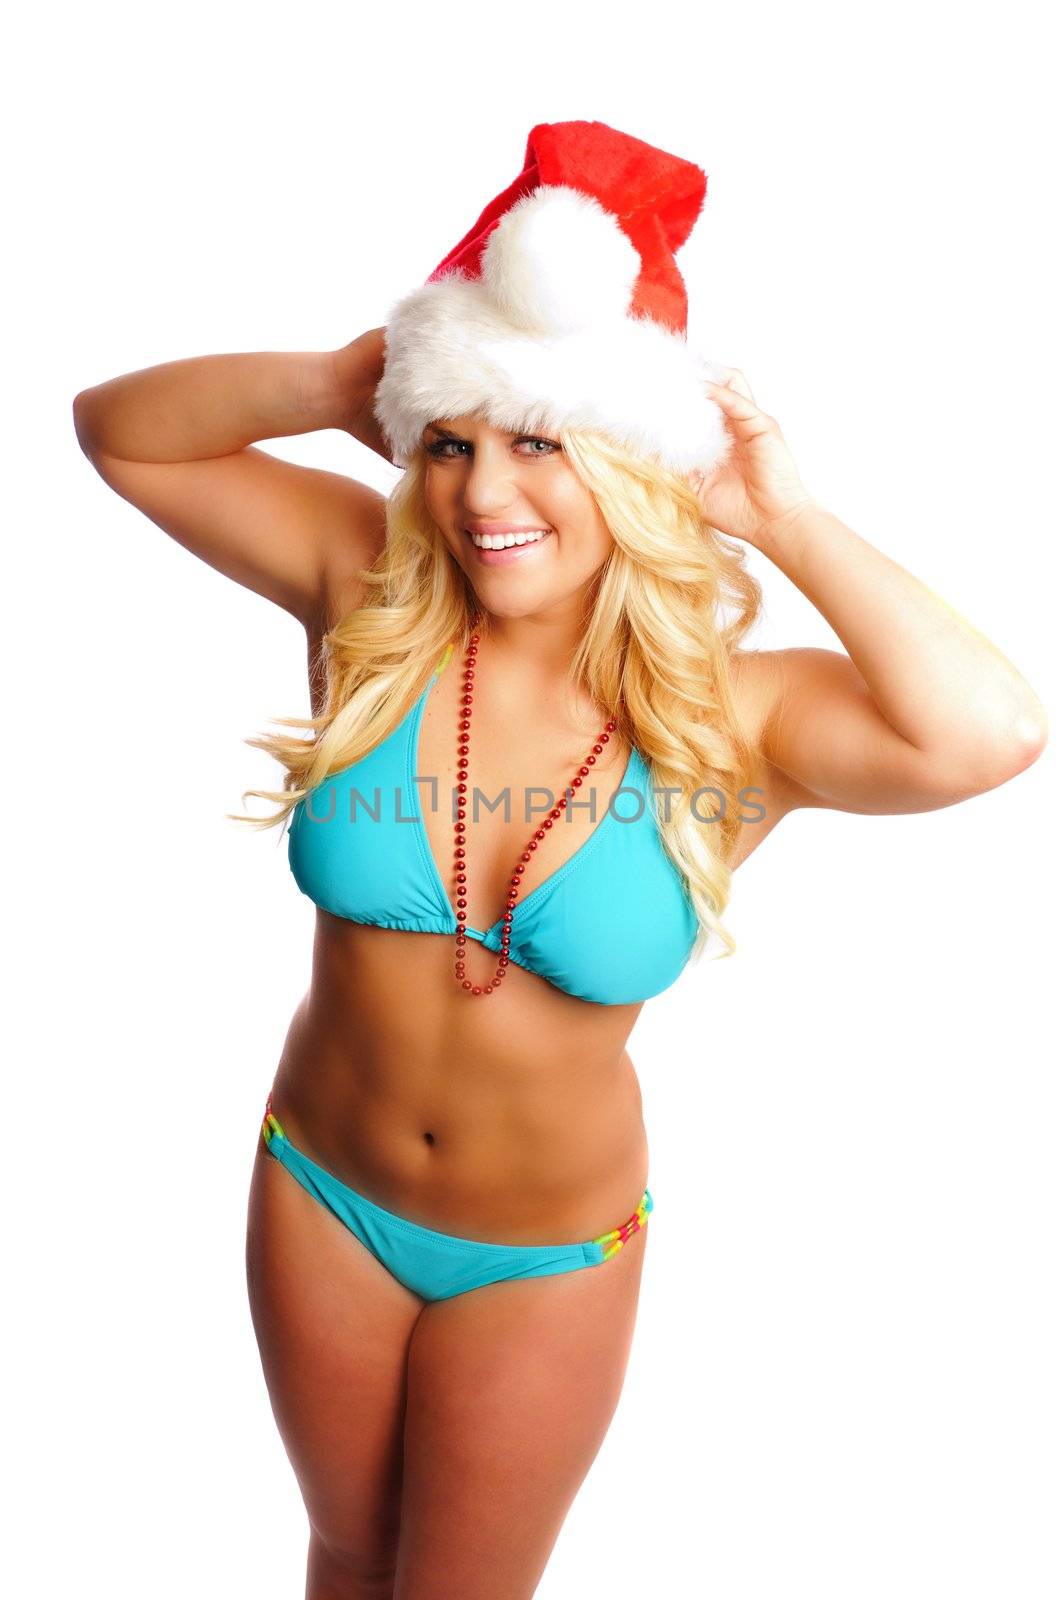 Ms Santa Baby by PDImages